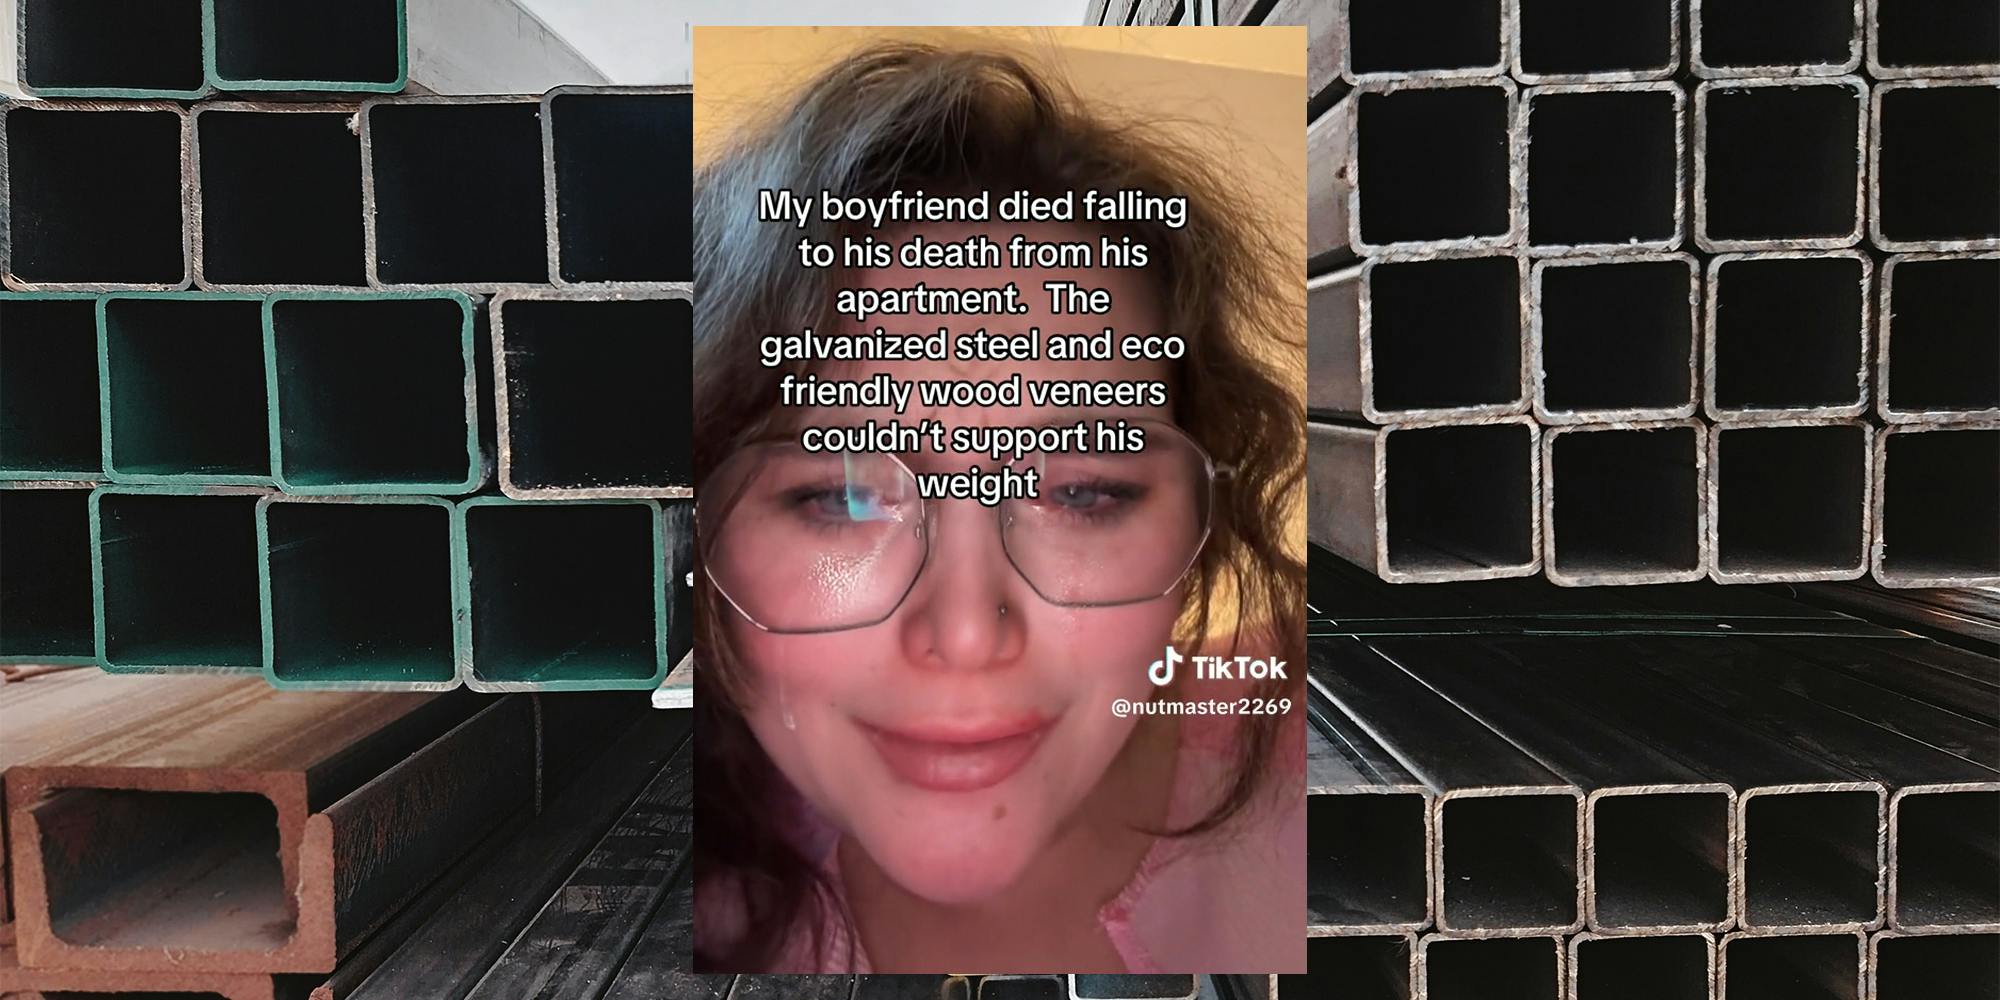 young woman crying with caption "my boyfriend died falling to his death from his apartment. The galvanized steel and eco friendly veneers couldn't support his weight" (inset) galvanized square steel (background)